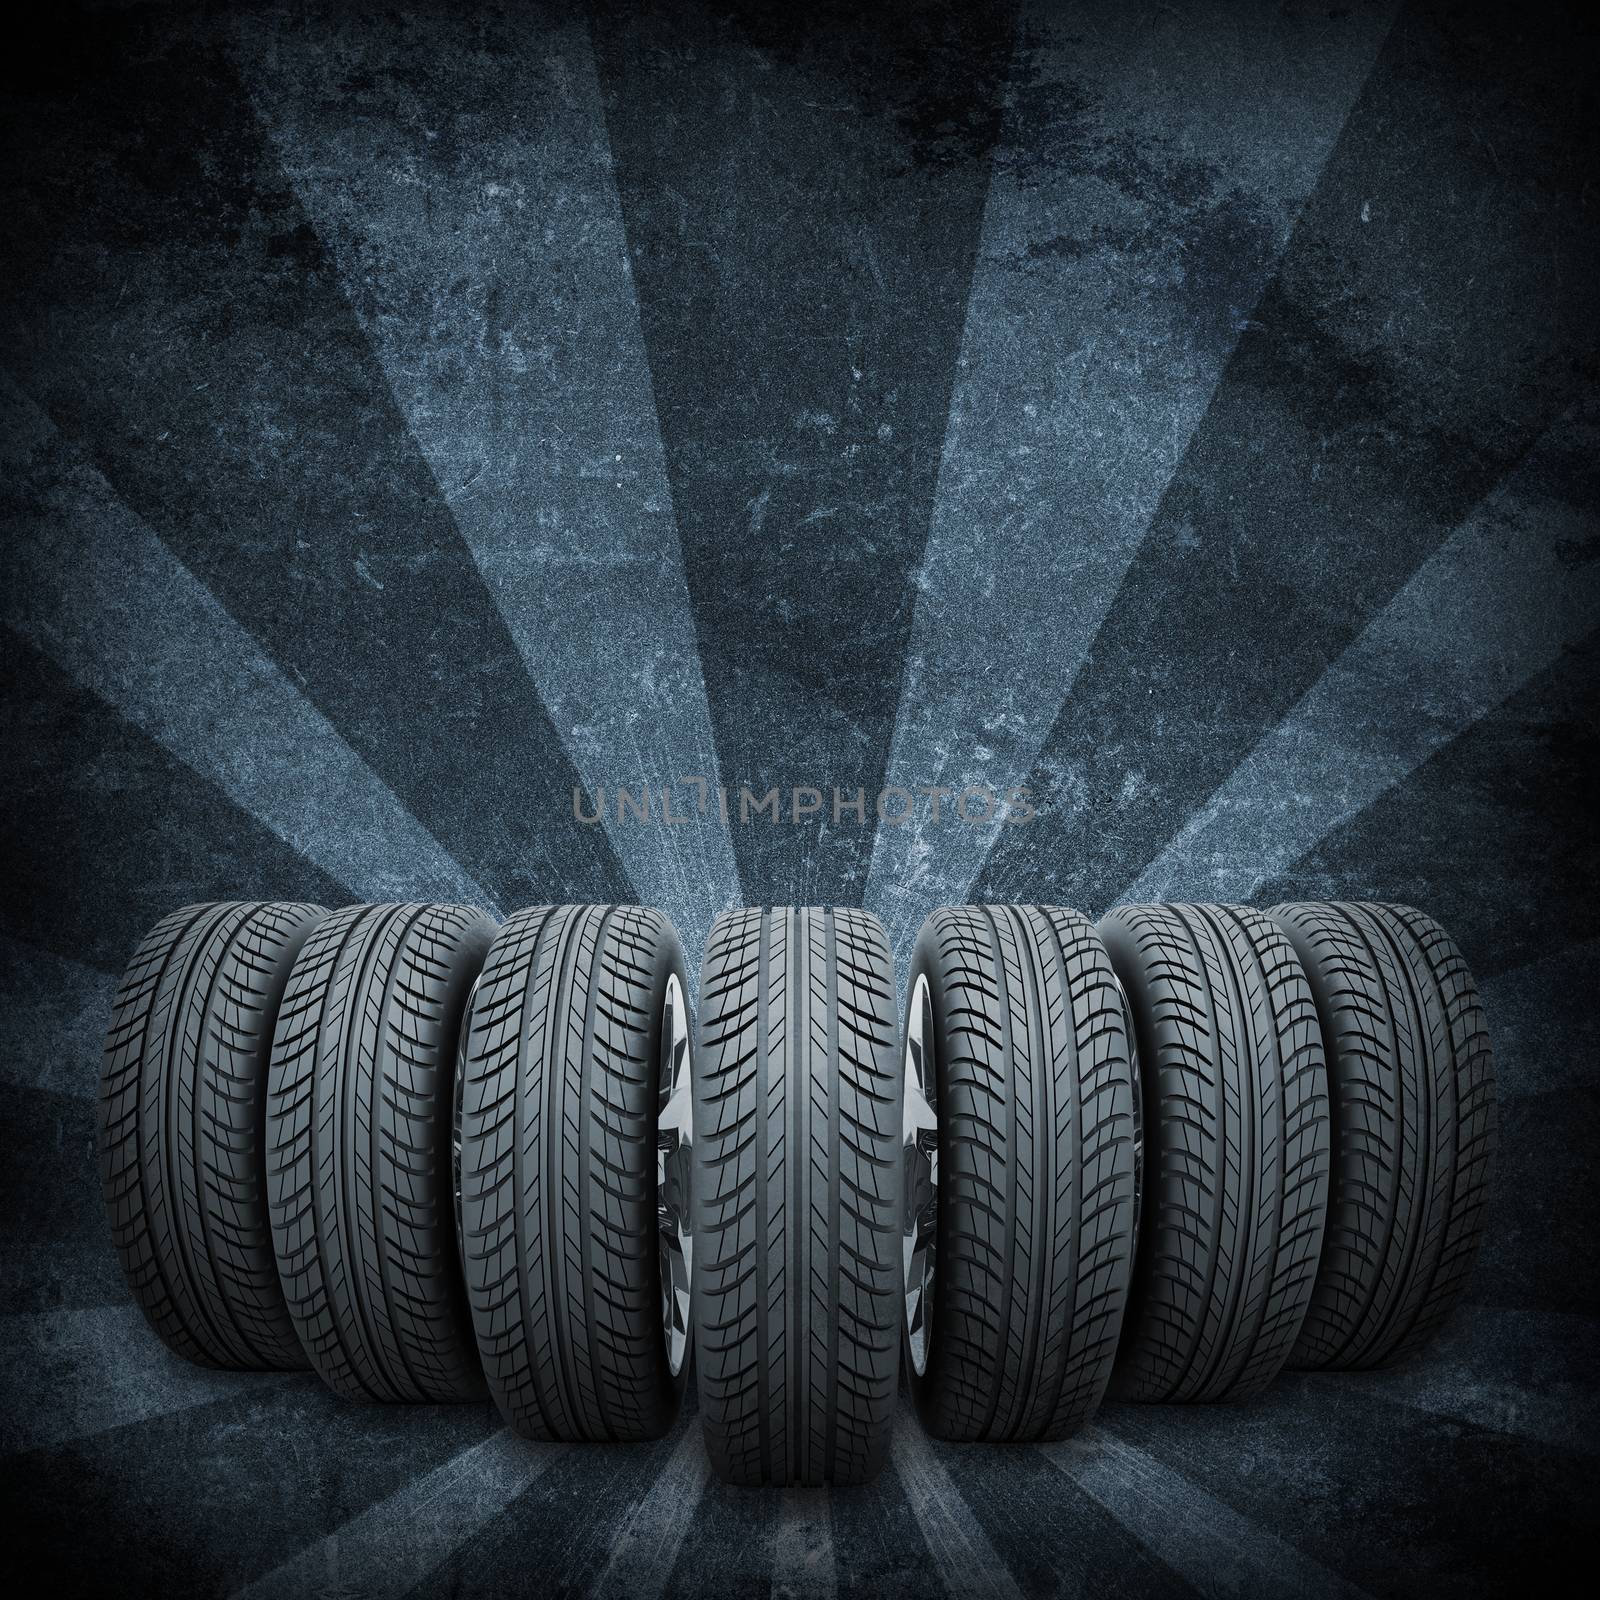 Wedge of new car wheels. Abstract dark background is concrete surface and stripes at bottom